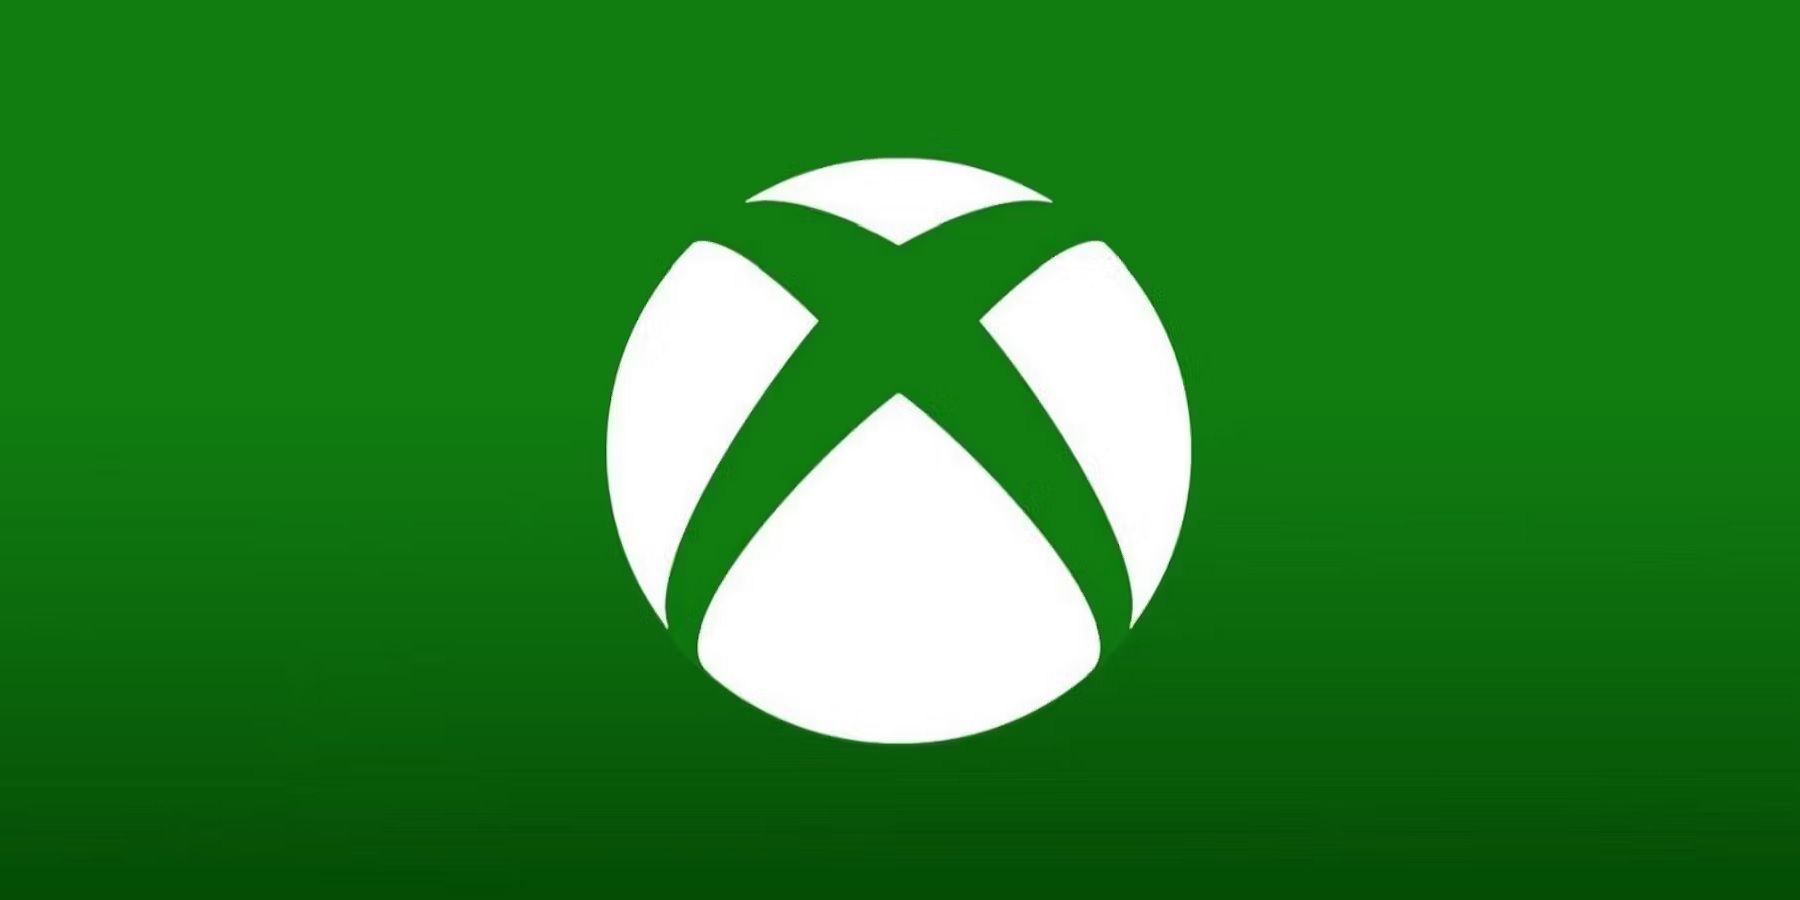 Xbox Highlights 11 Big Games Coming to the Console This Month